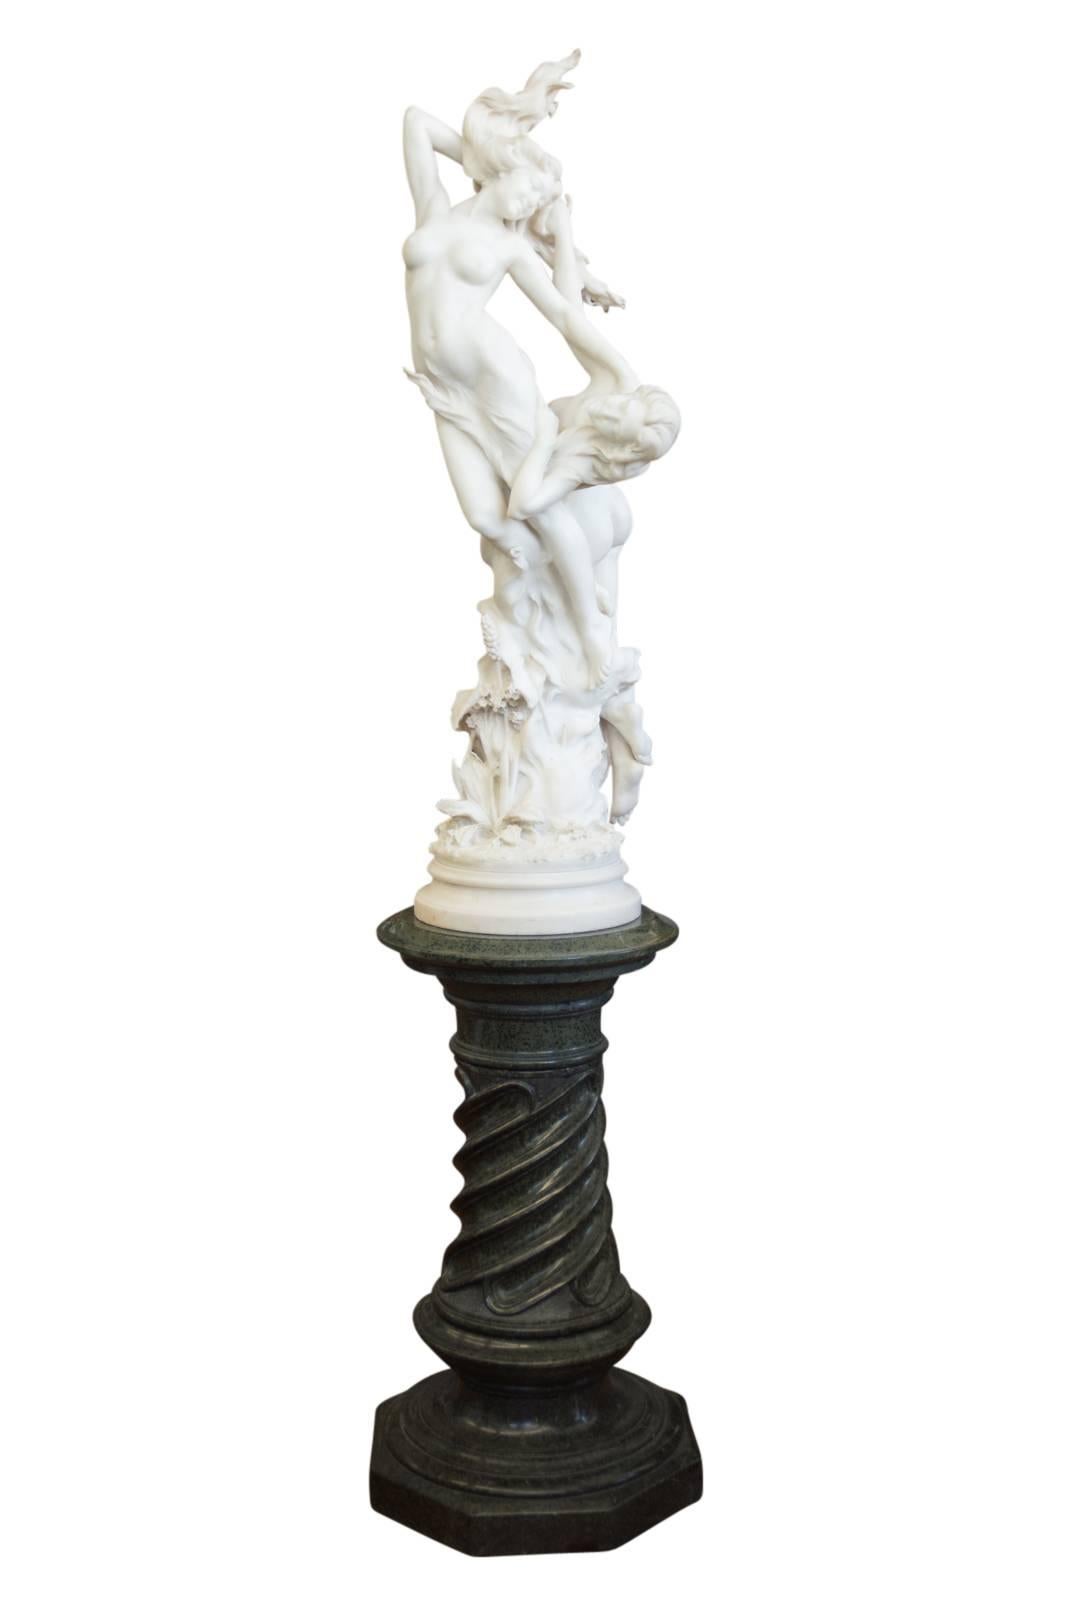 A Superb Italian Carved White marble Figure Depicting Two Sinuous Intertwined Nude Ladies by Vitorio Caradossi, on a Green Marble Pedestal.

Vitorio Caradossi (Florence, 1861-1909)

Dimensions of figure: 54